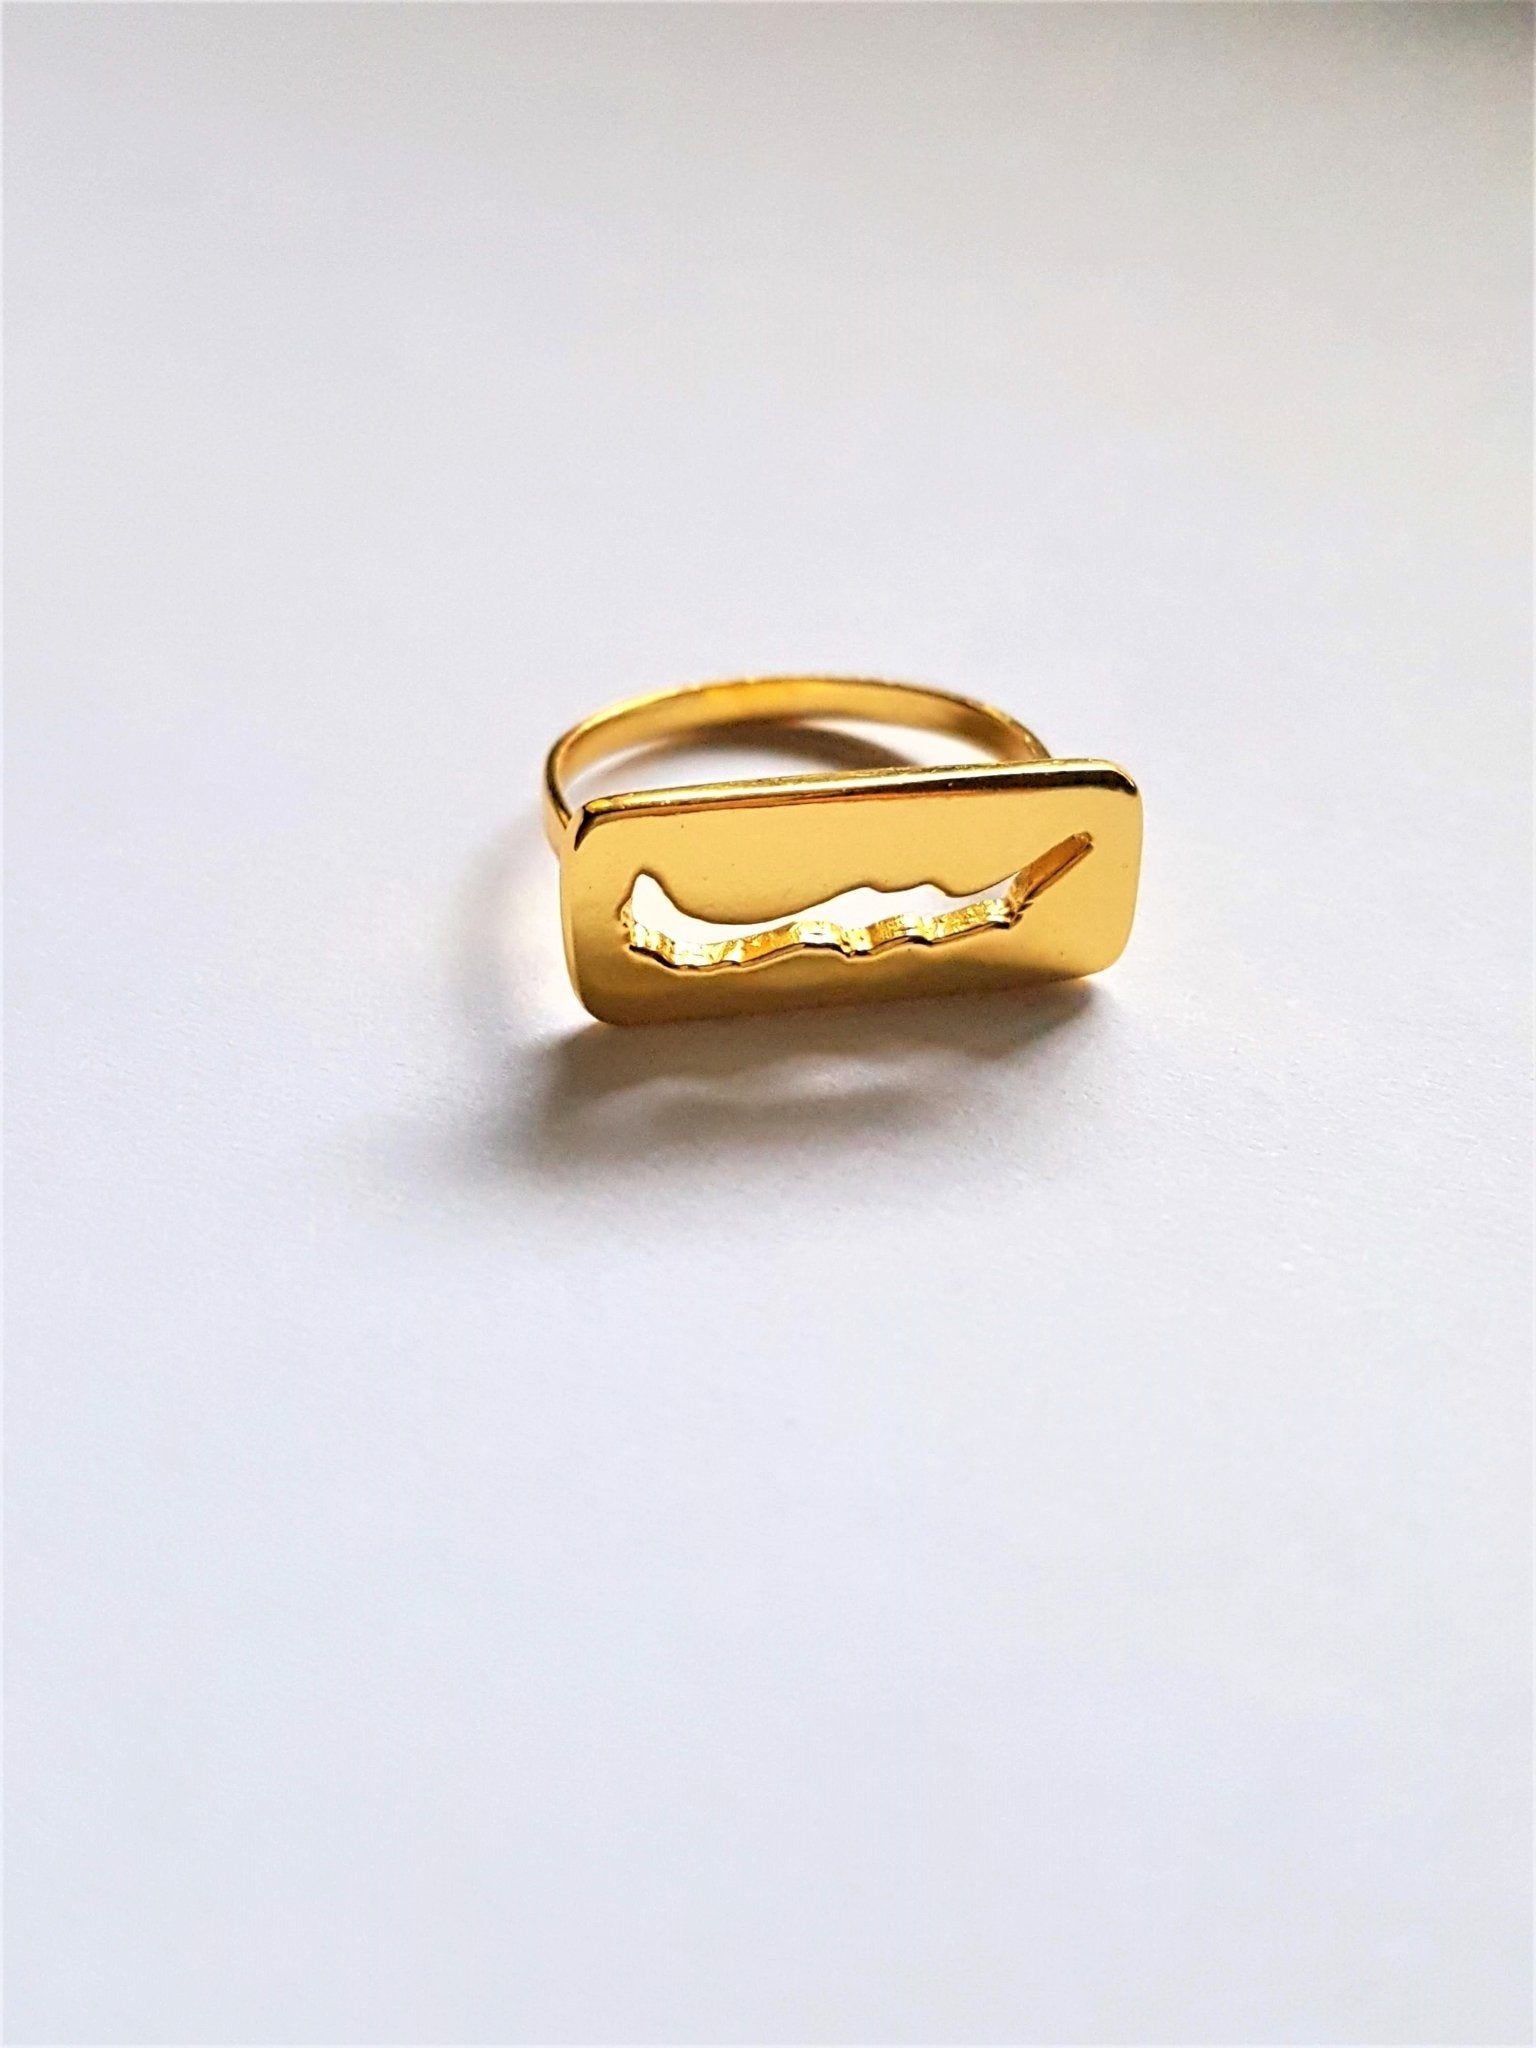 18k plated yellow gold - size 9 Savary island ring with savary island shape cut out of rectangle